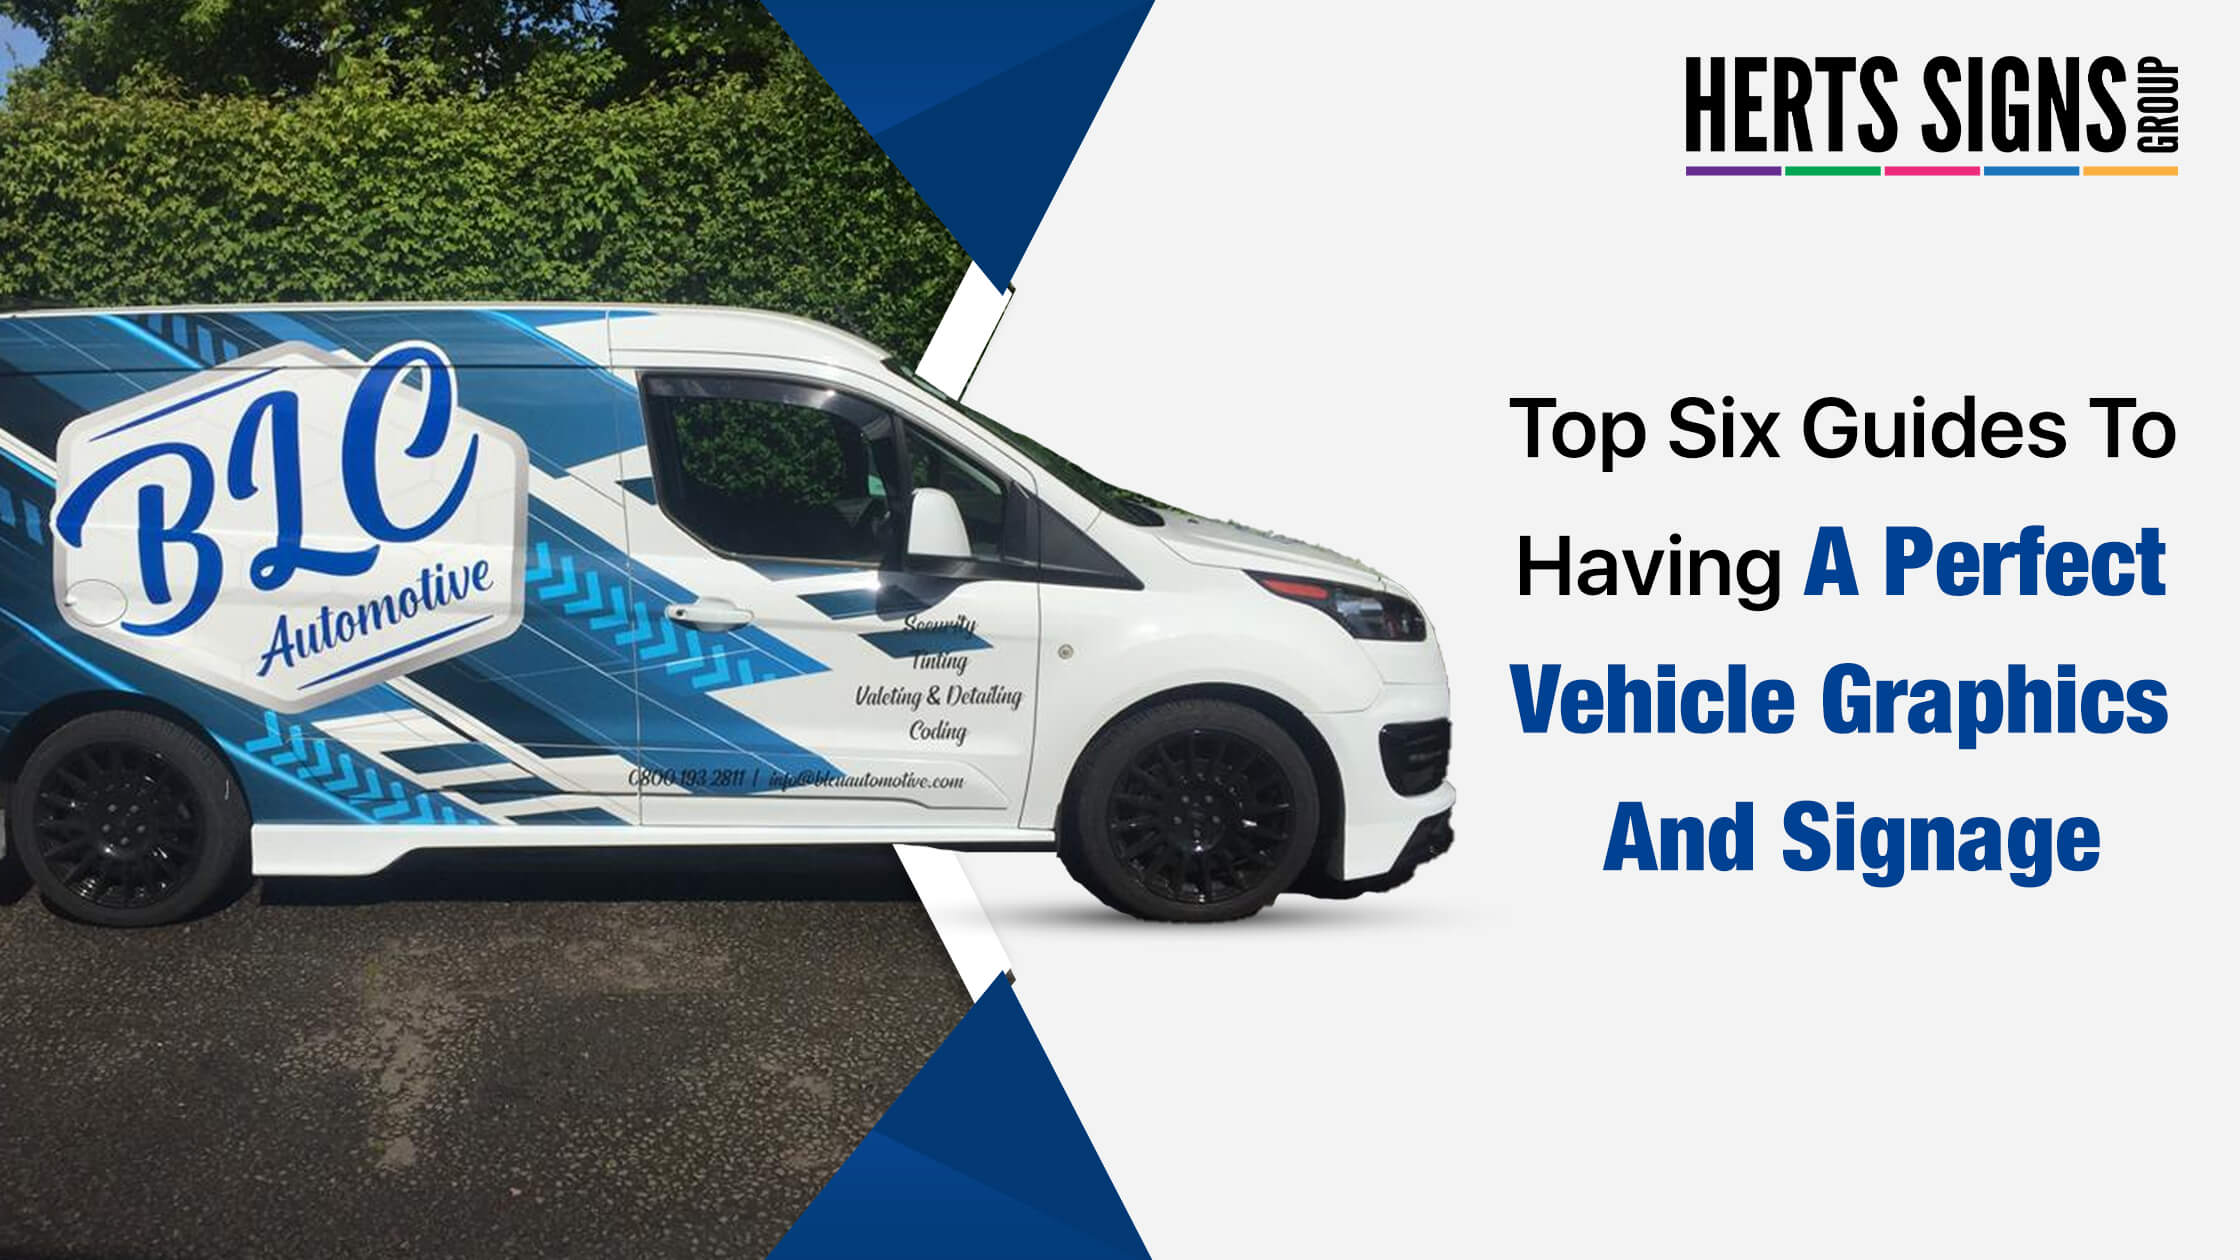 Our Top Six Guides To Having A Perfect Vehicle Graphics And Signage